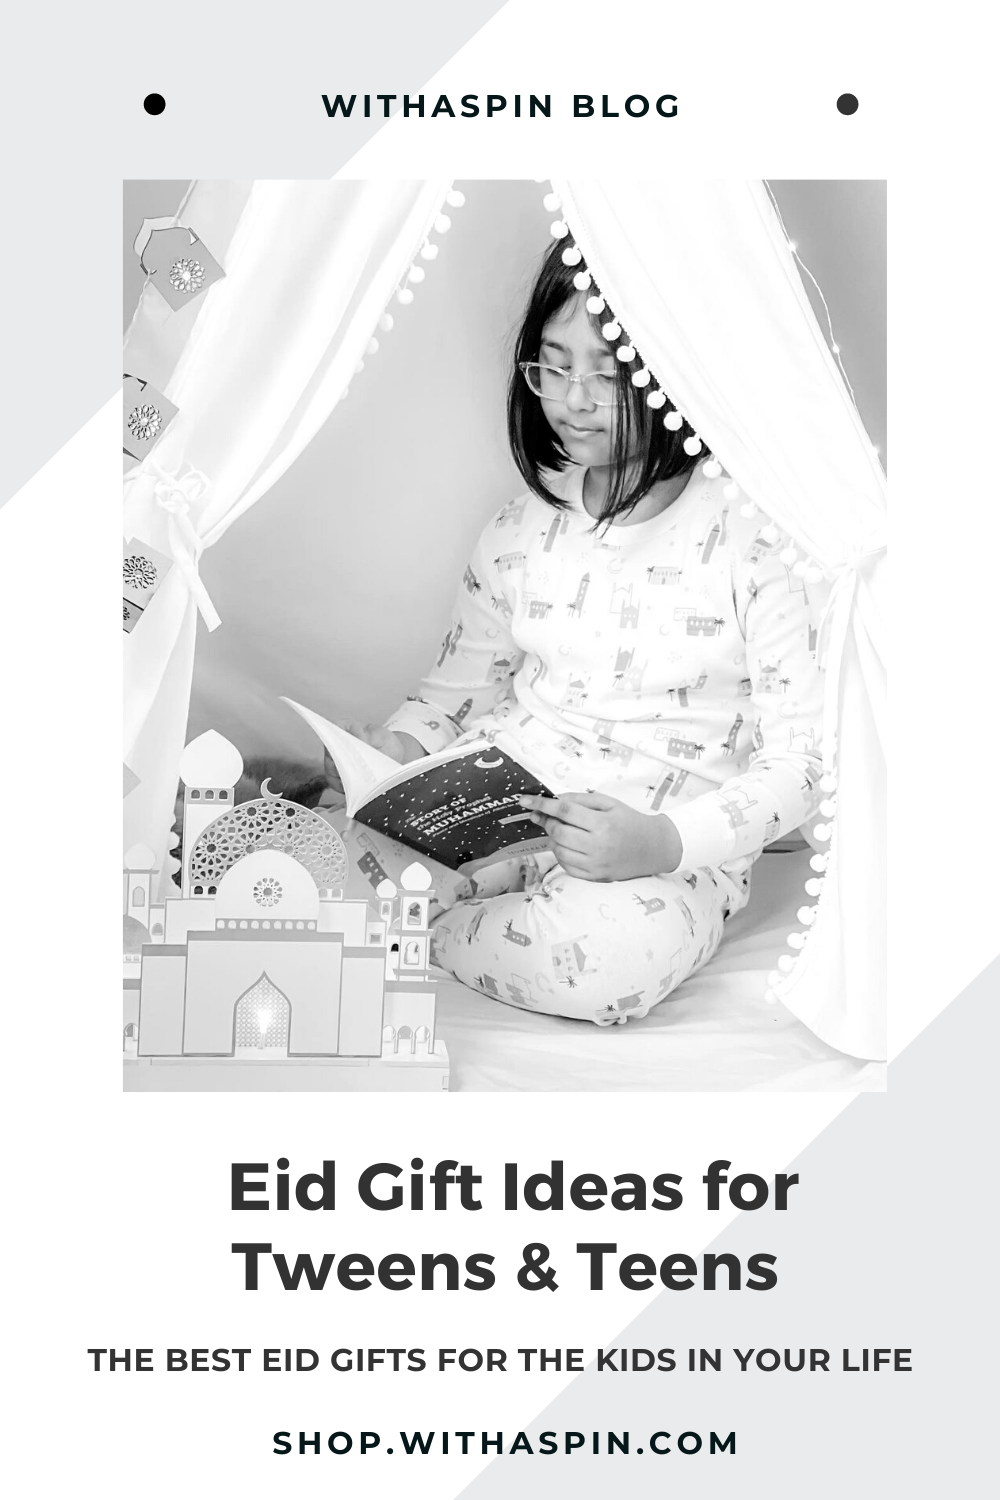 Eid Gift Guide : Eid Gifts for Teens